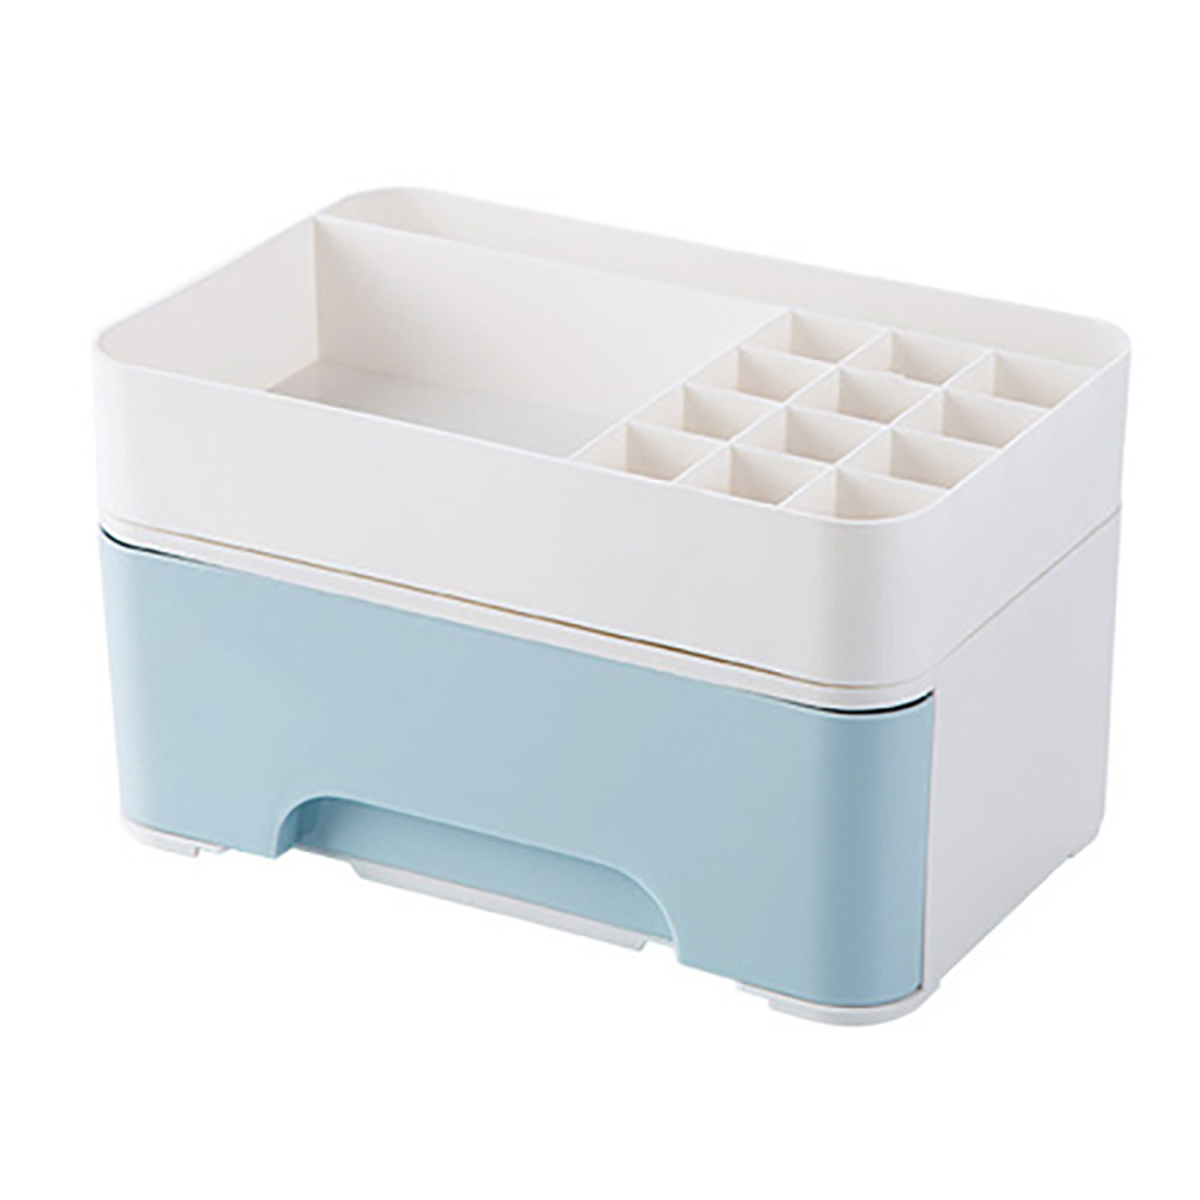 Desk-Skin-Care-Products-Storage-Box-Multi-functional-Lipstick-Cosmetic-Storage-Box-with-Drawer-Home--1763759-8